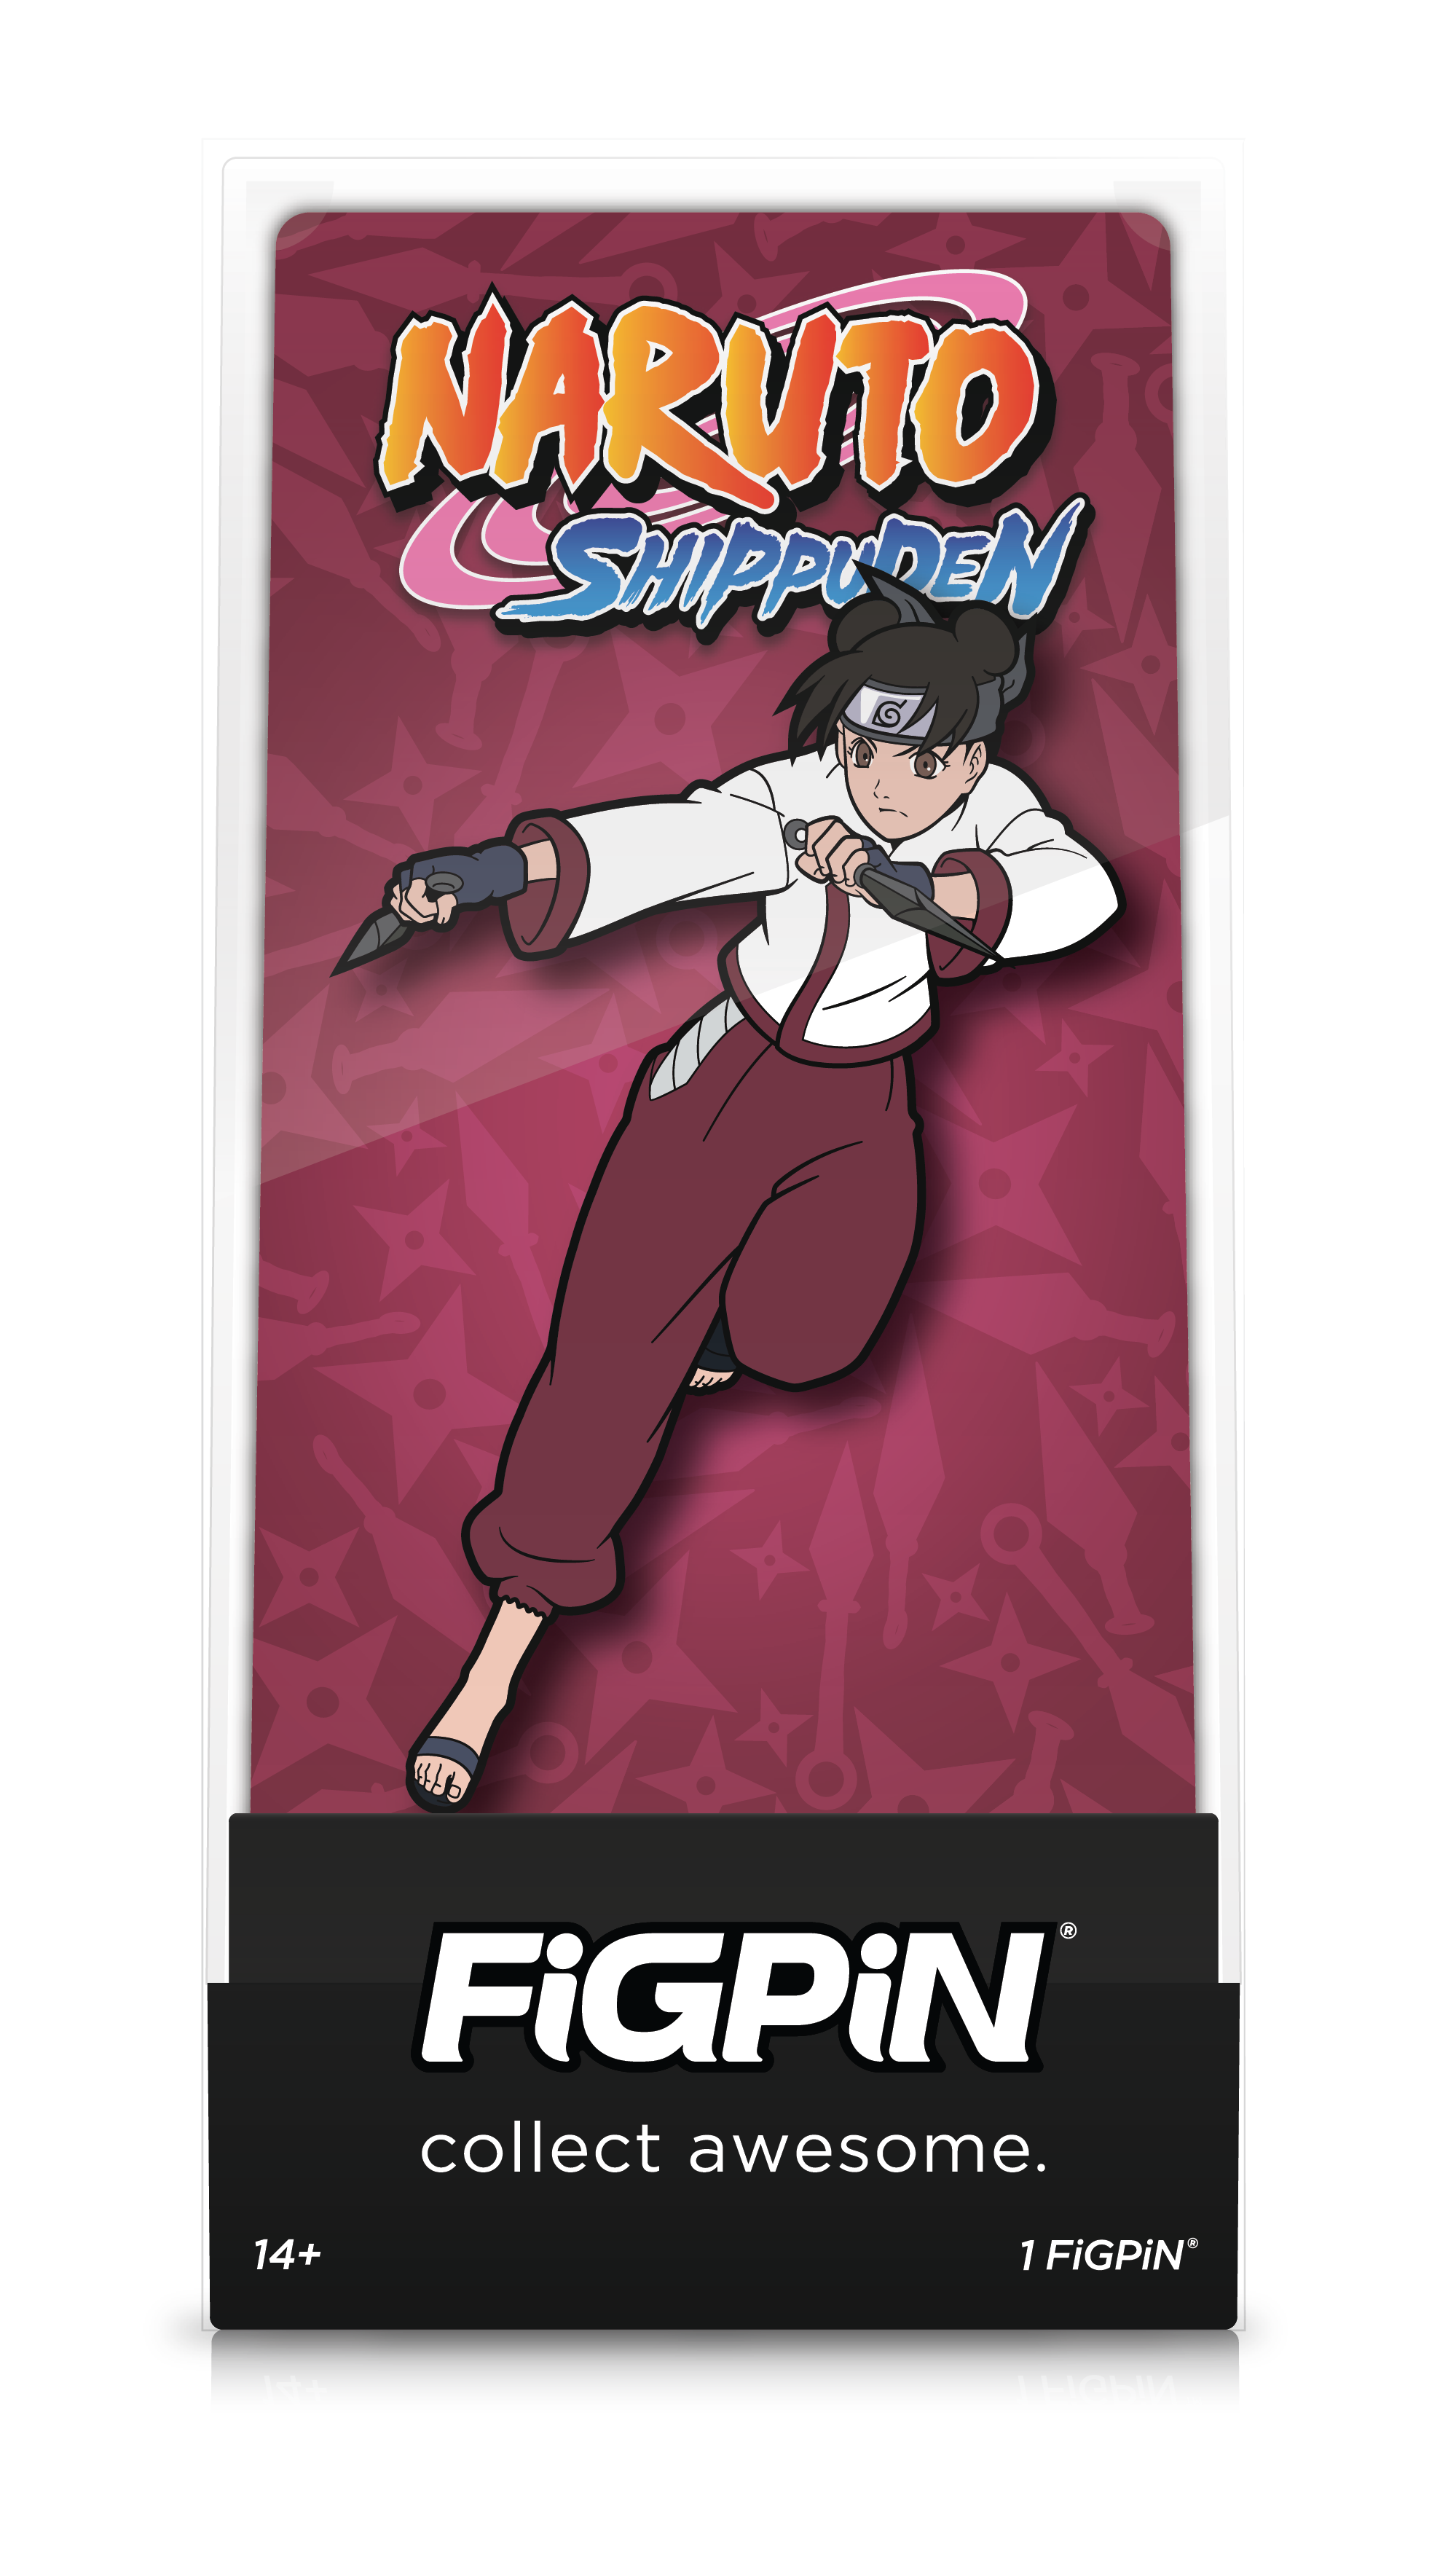 Front view of Naruto Shippuden's Tenten enamel pin inside FiGPiN Display case reading “collect awesome"